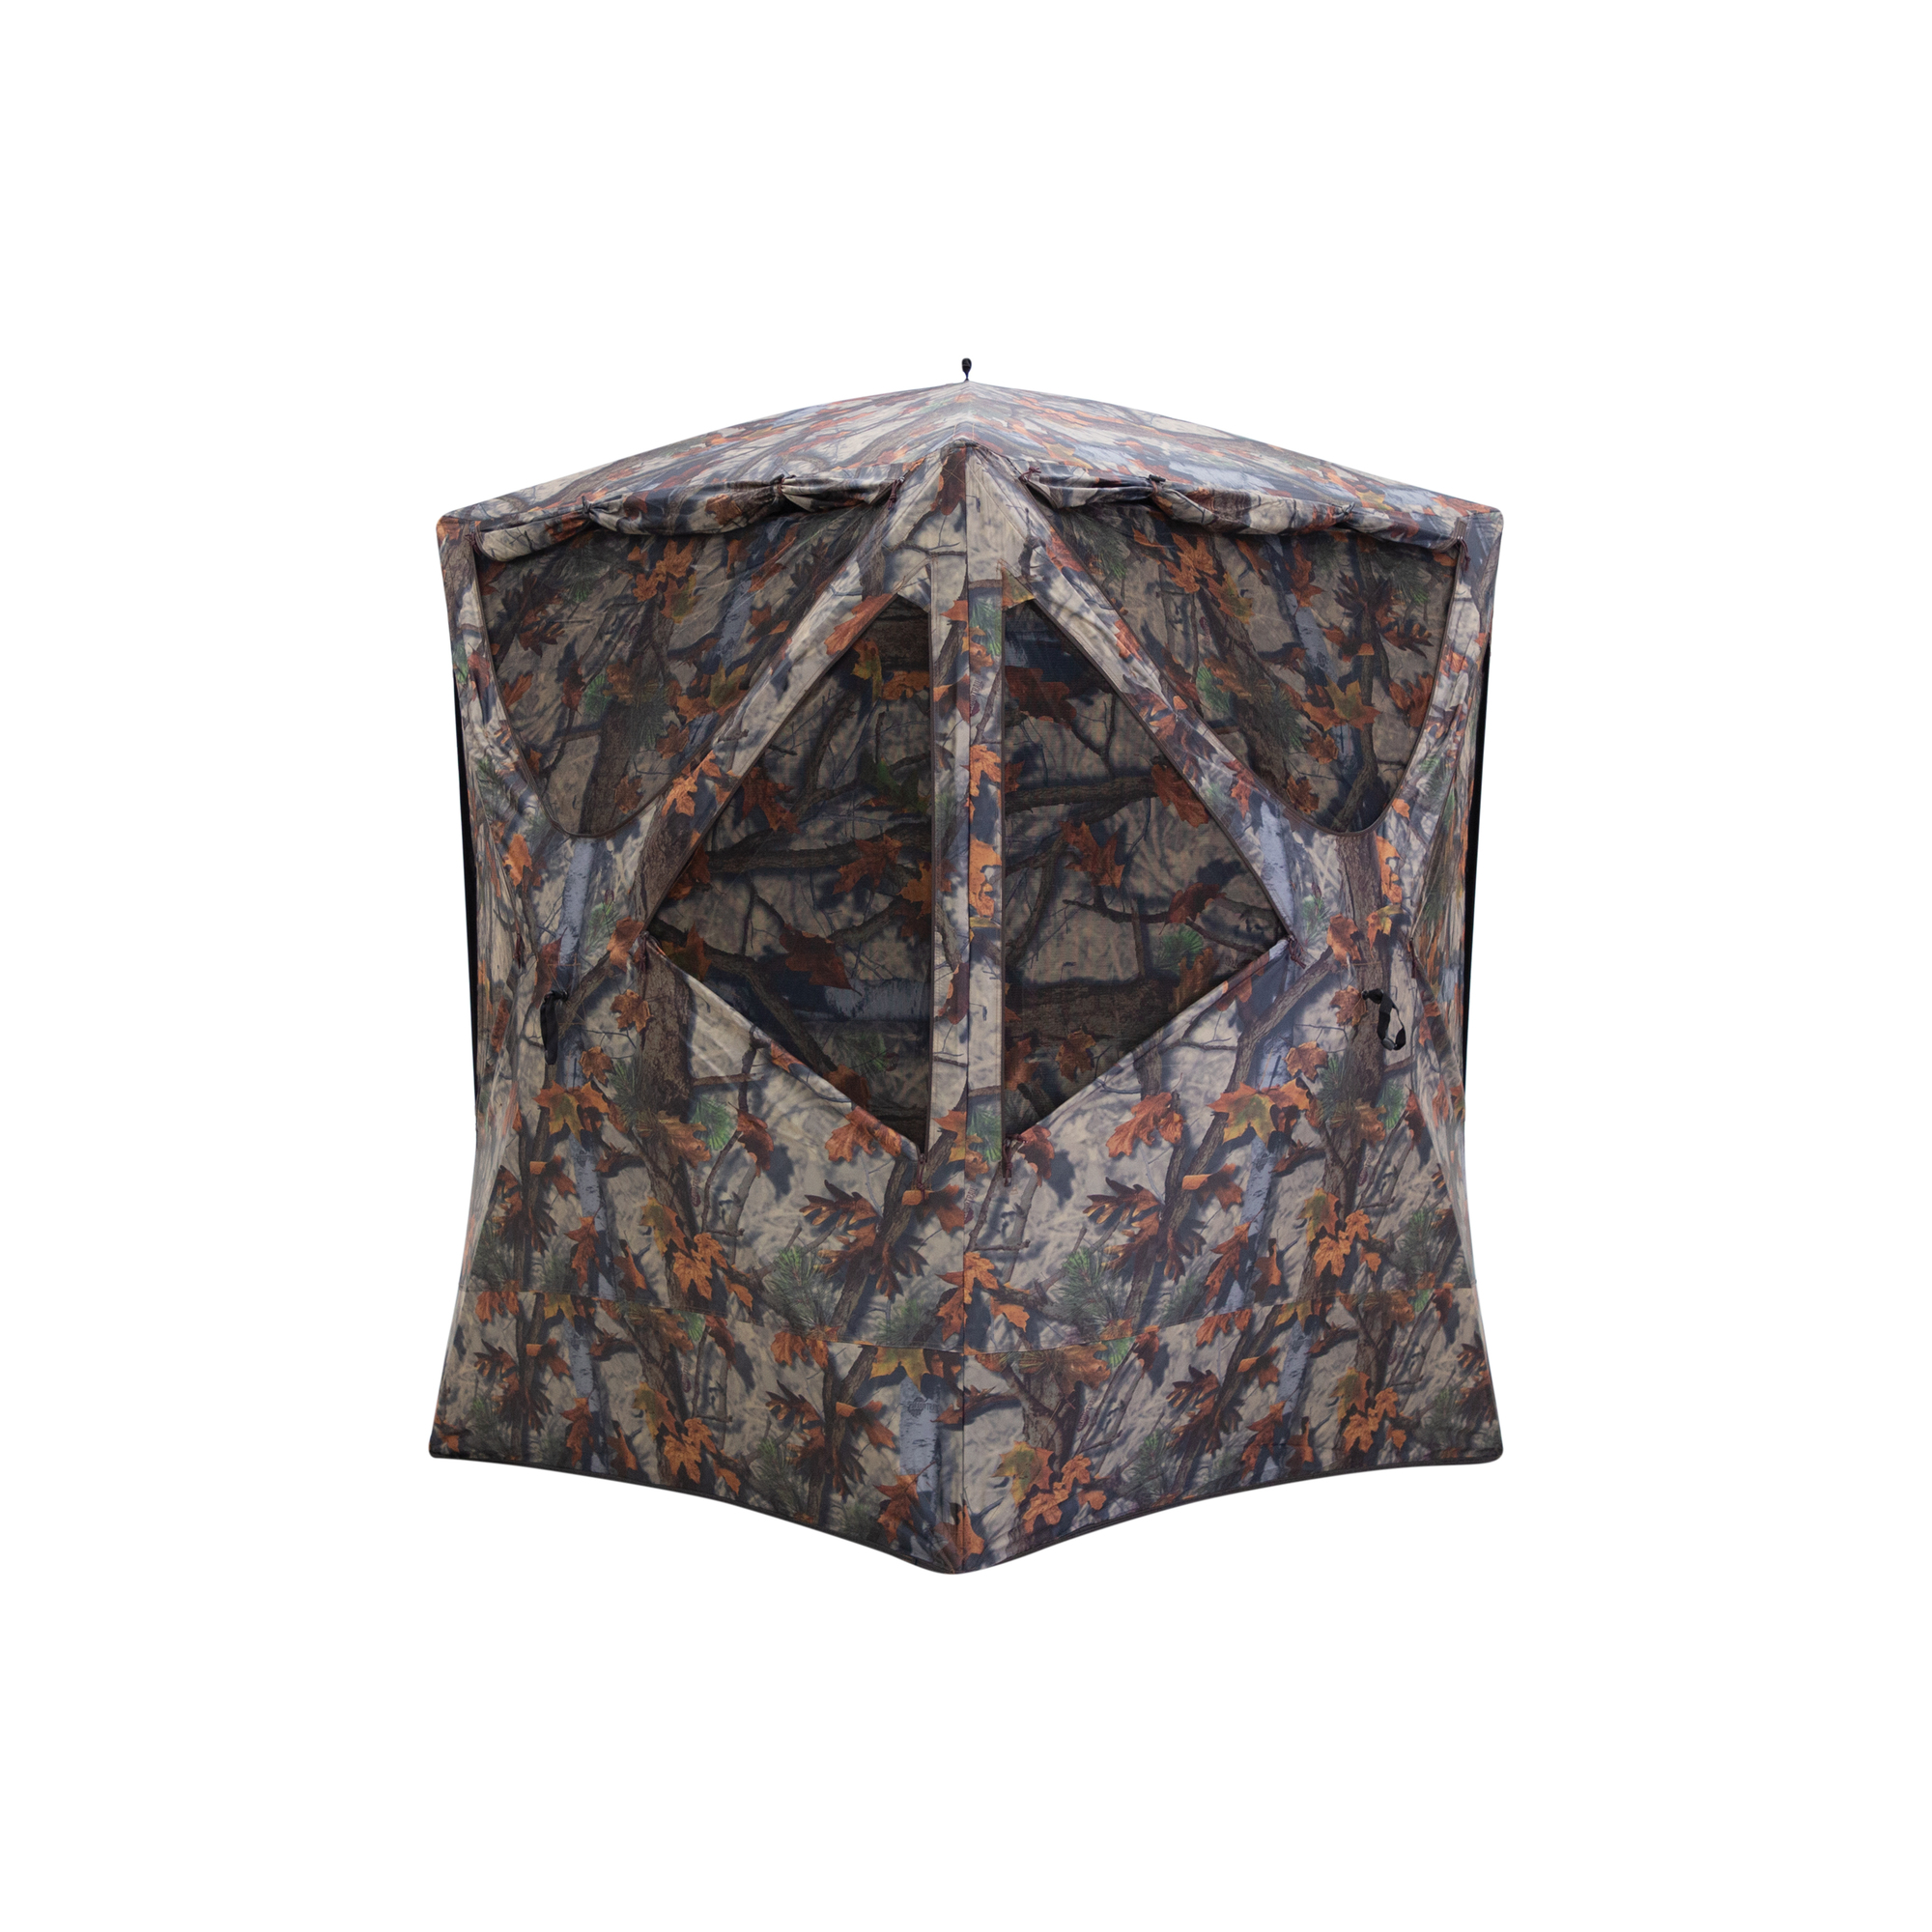 Barronett Blinds, Prowler 300 Hunting Blind, 2-Person Capacity, Color Camouflage, Material Polyester, Model PR300BT